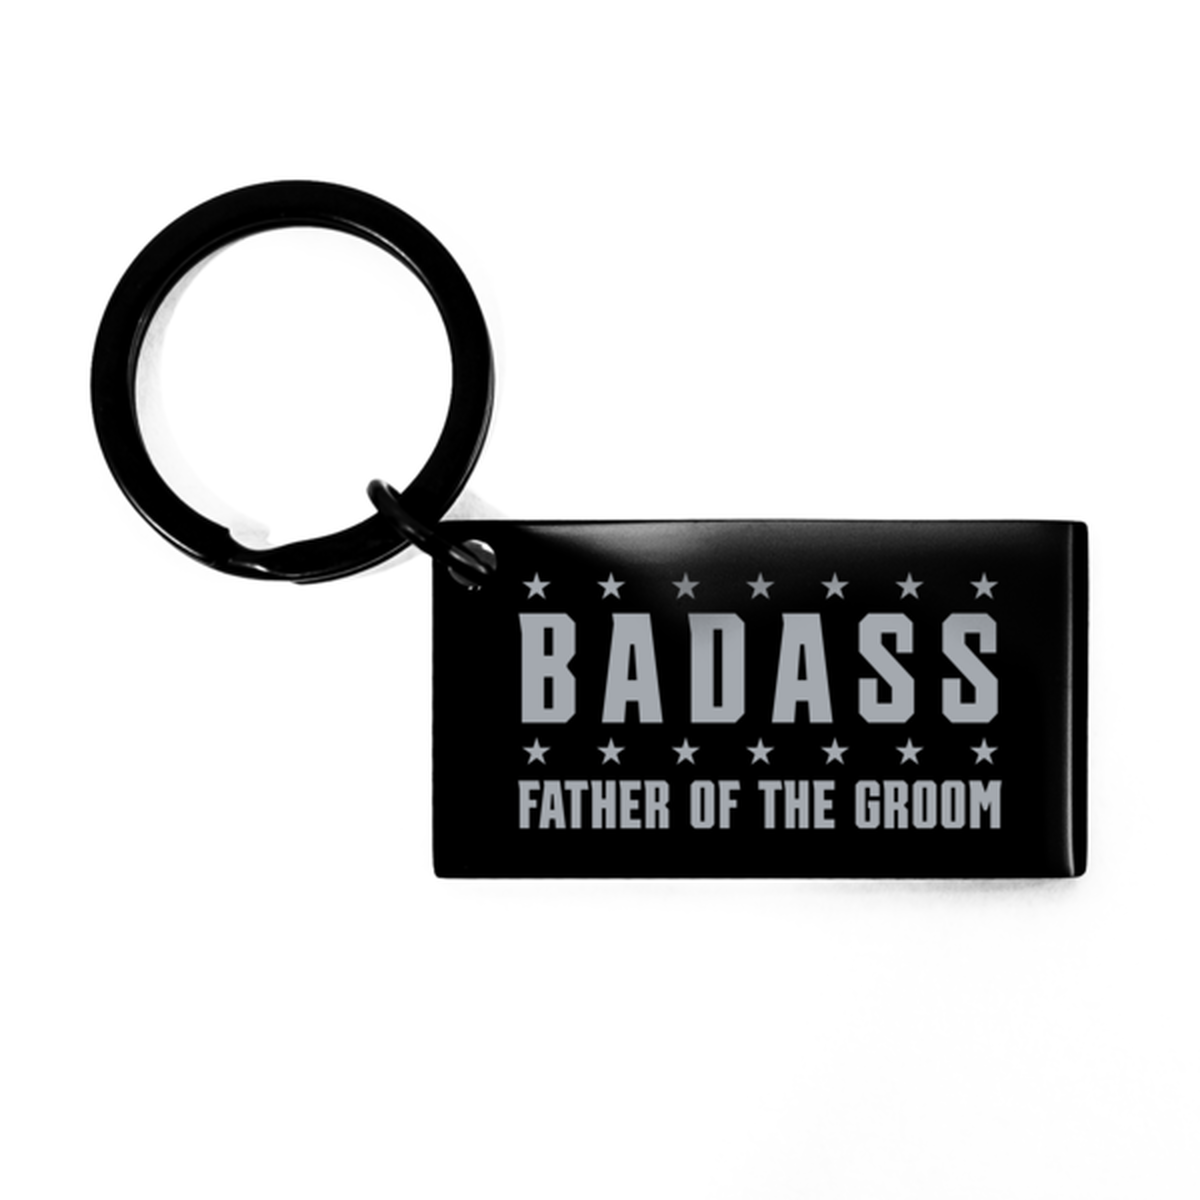 Father of the groom Black Keychain, Badass Father of the Broom, Funny Family Gifts  Keyring For Father of the groom From Son Daughter